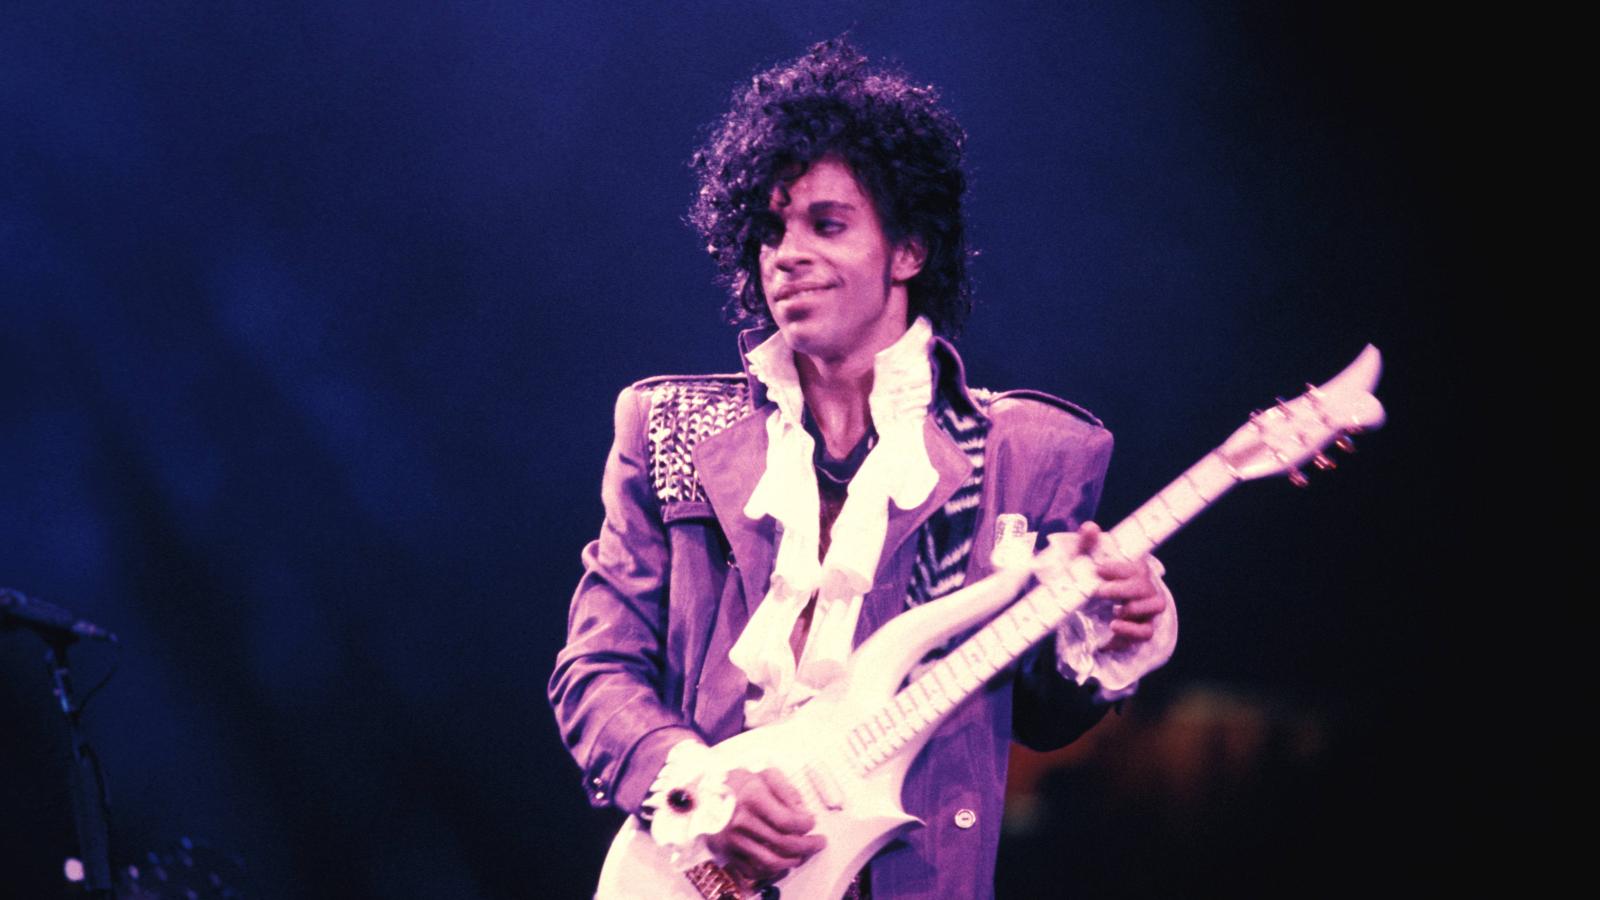 Trump played Purple Rain at a rally in Minneapolis, and Prince's estate is furious